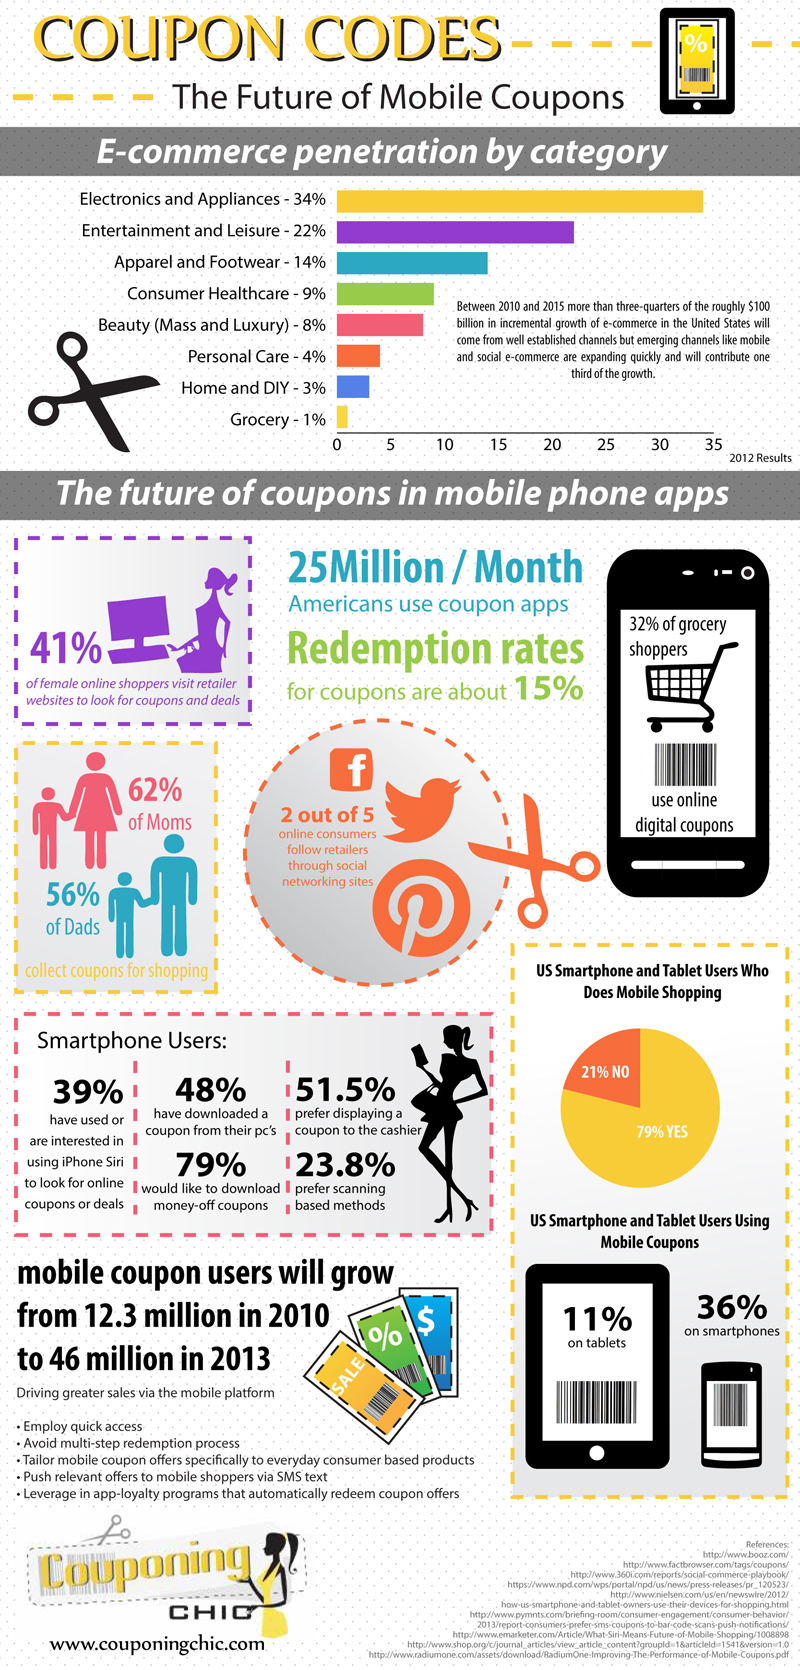 Coupon Codes: The Future of Mobile Coupons